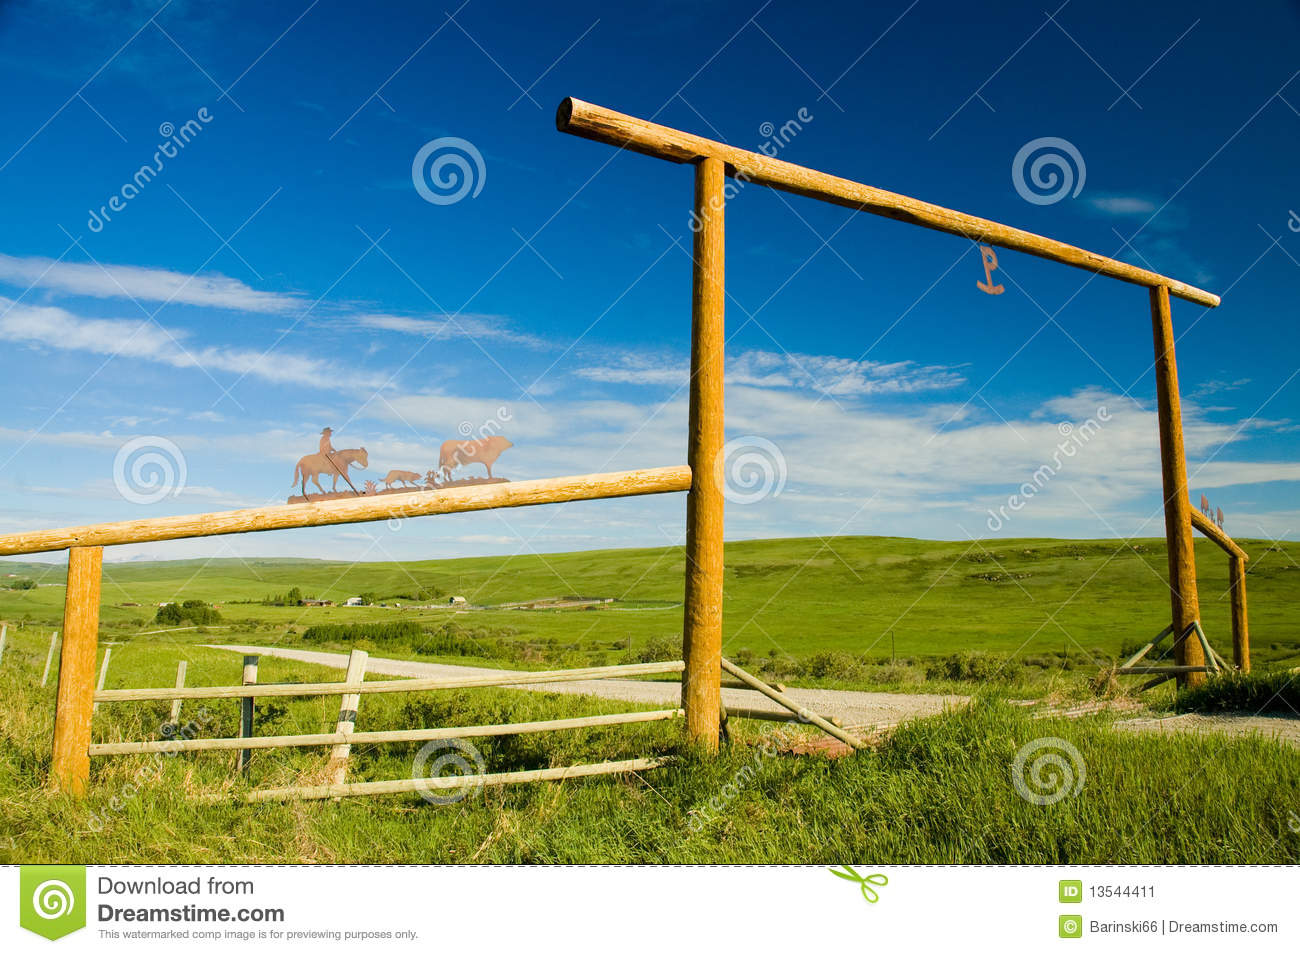 Ranch Gate Stock Image   Image  13544411